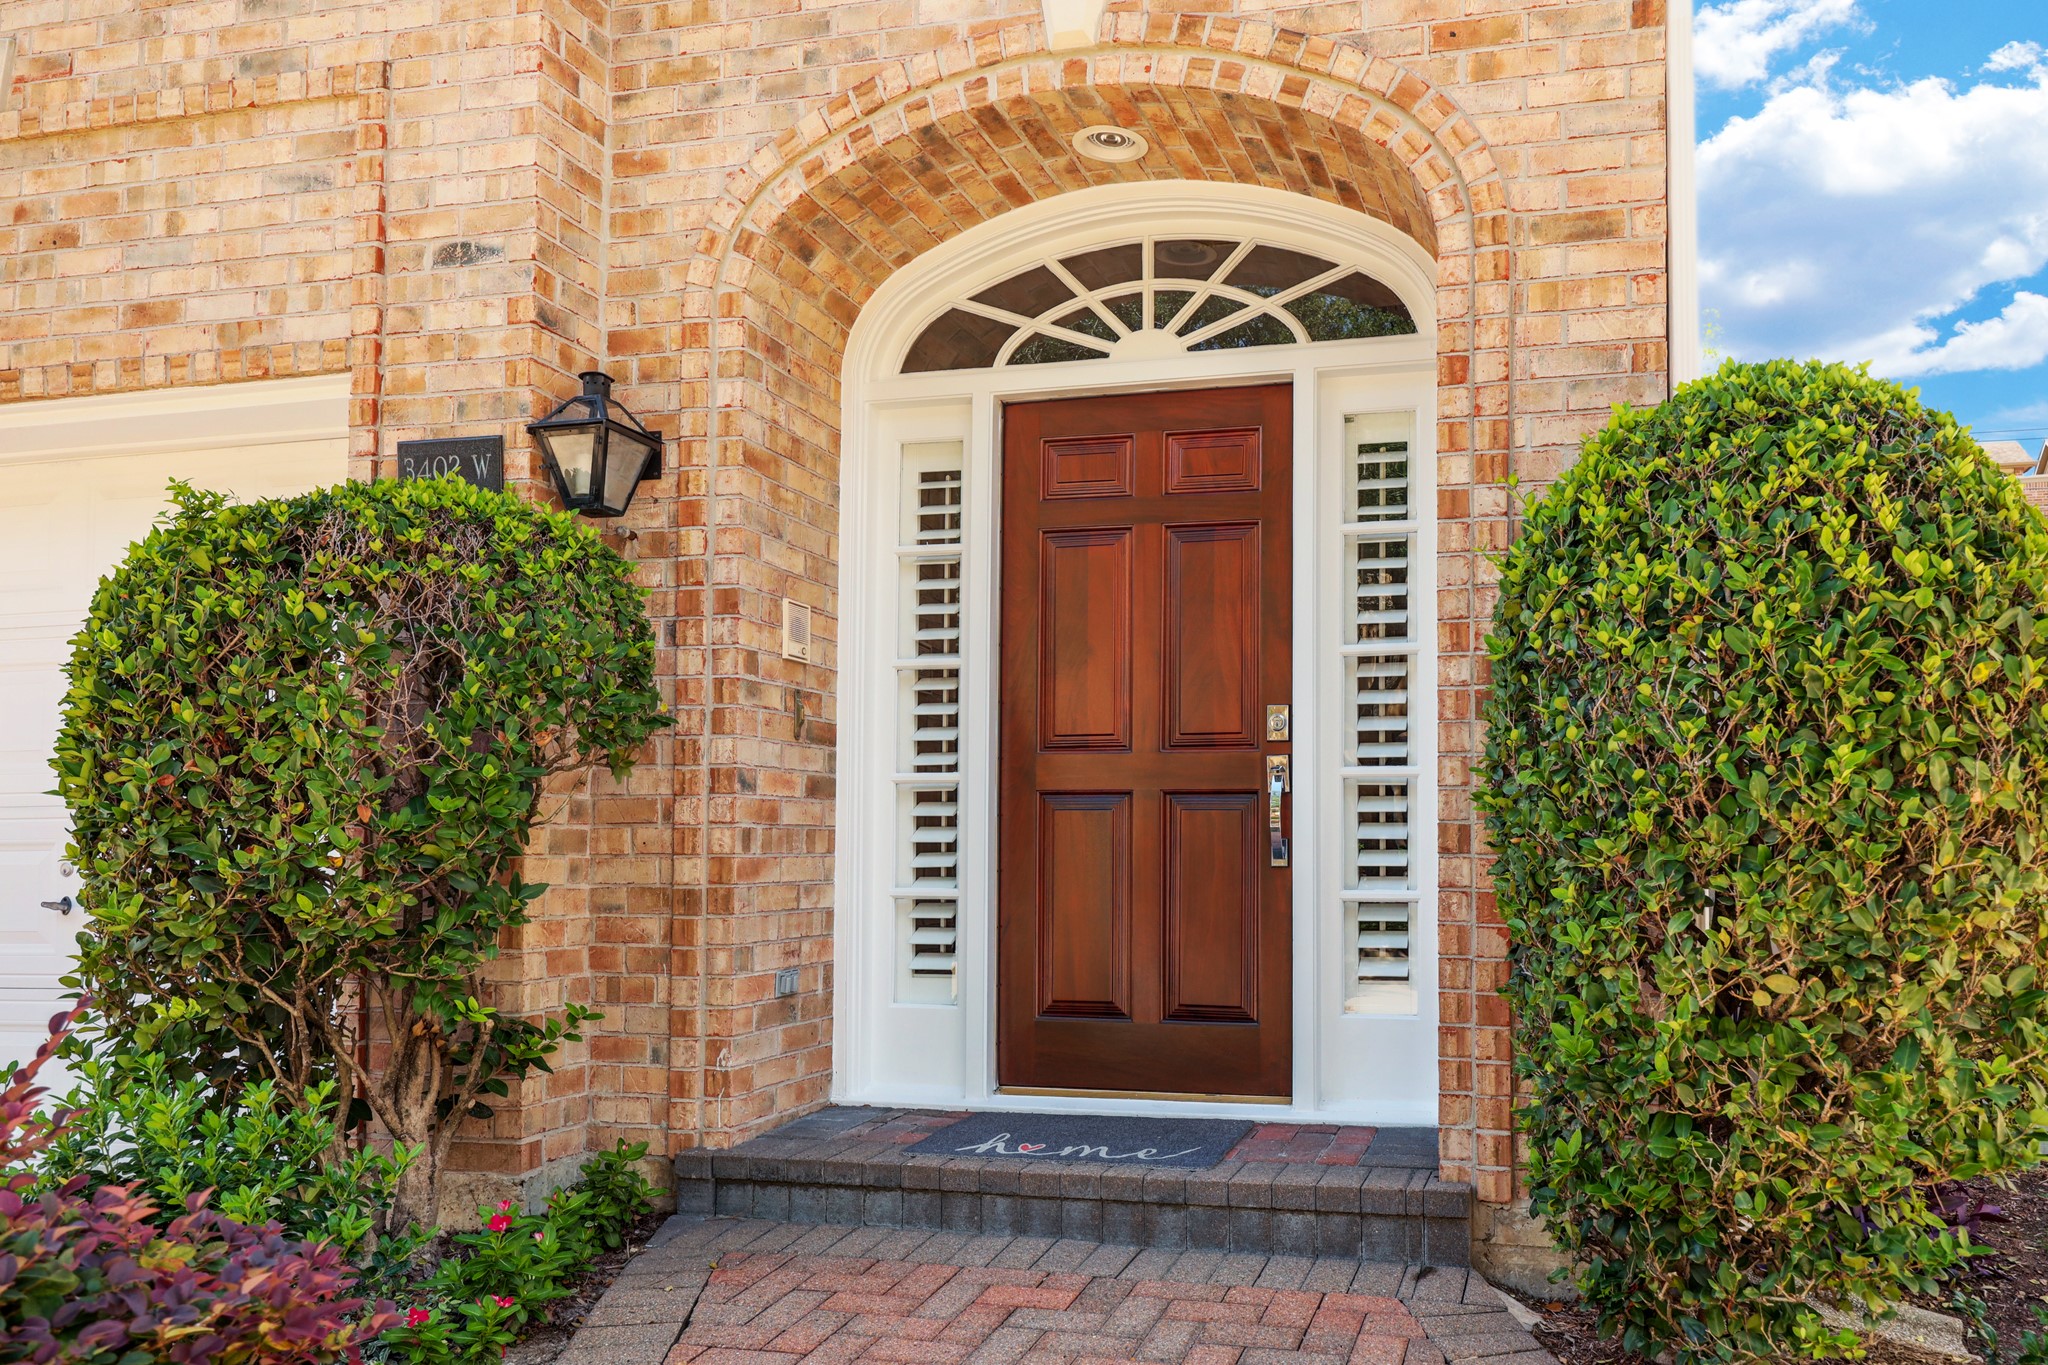 The freshly painted and attractive front door and surround are flanked by beds with shrubs and flowers.